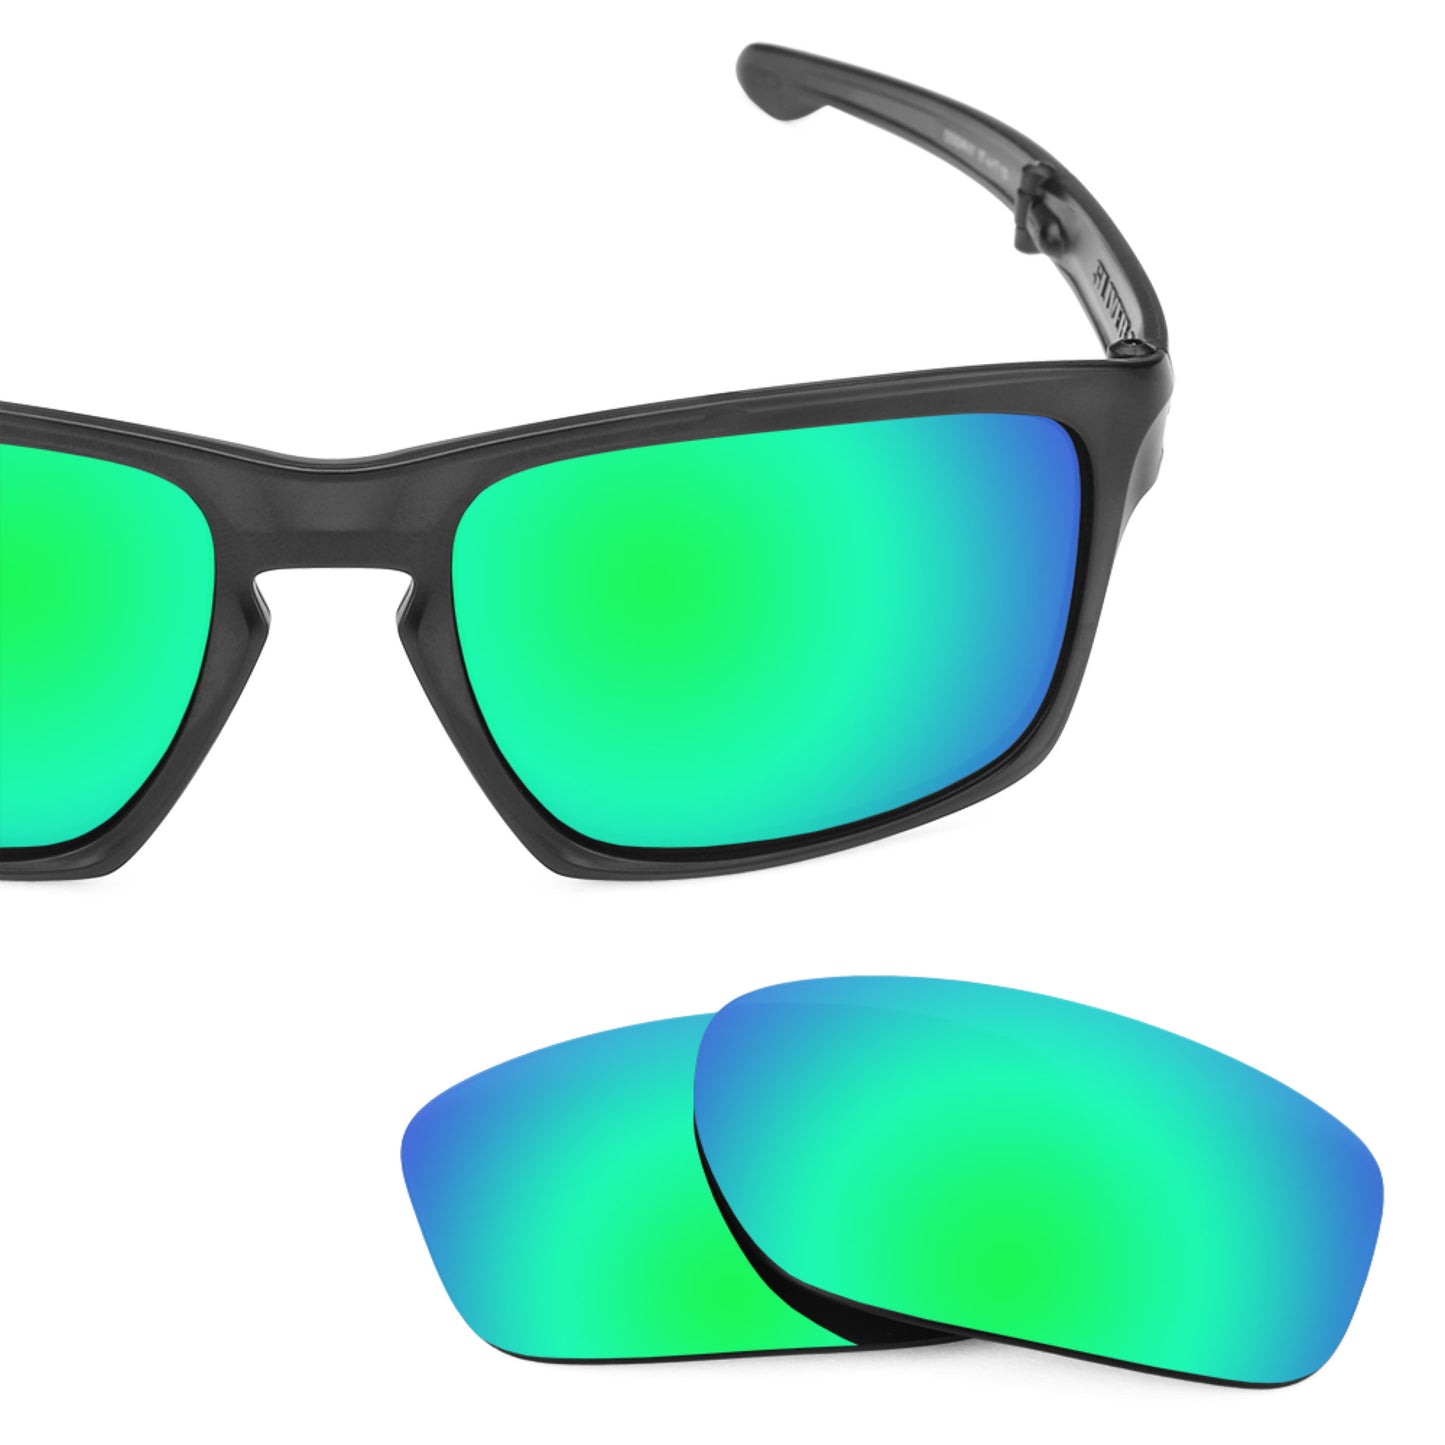 Revant replacement lenses for Oakley Sliver F Polarized Emerald Green